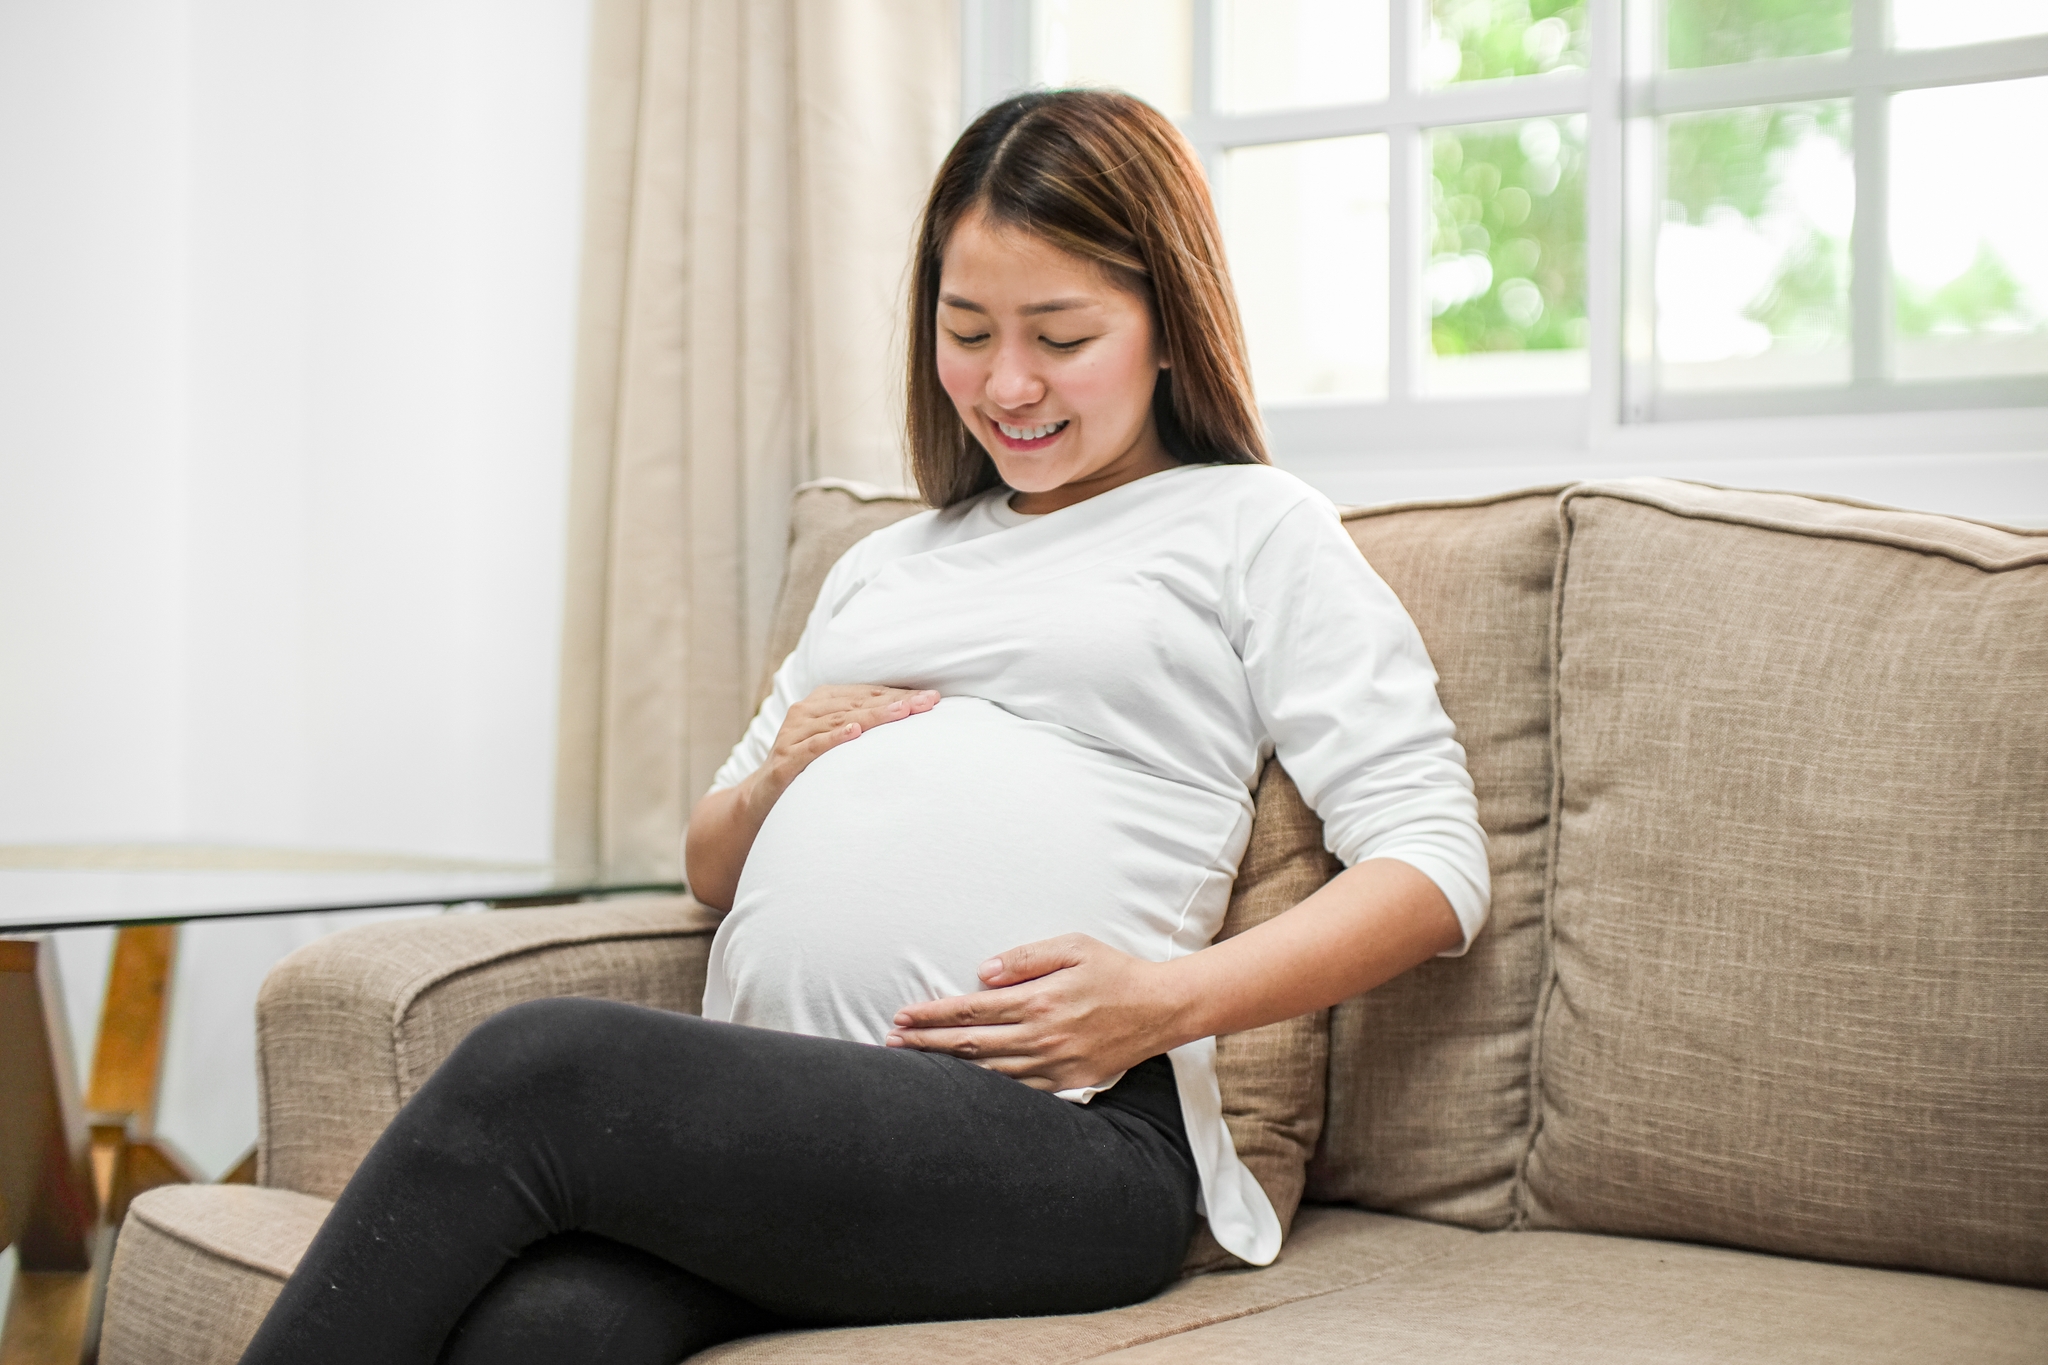 What happens when you drink caffeine while pregnant